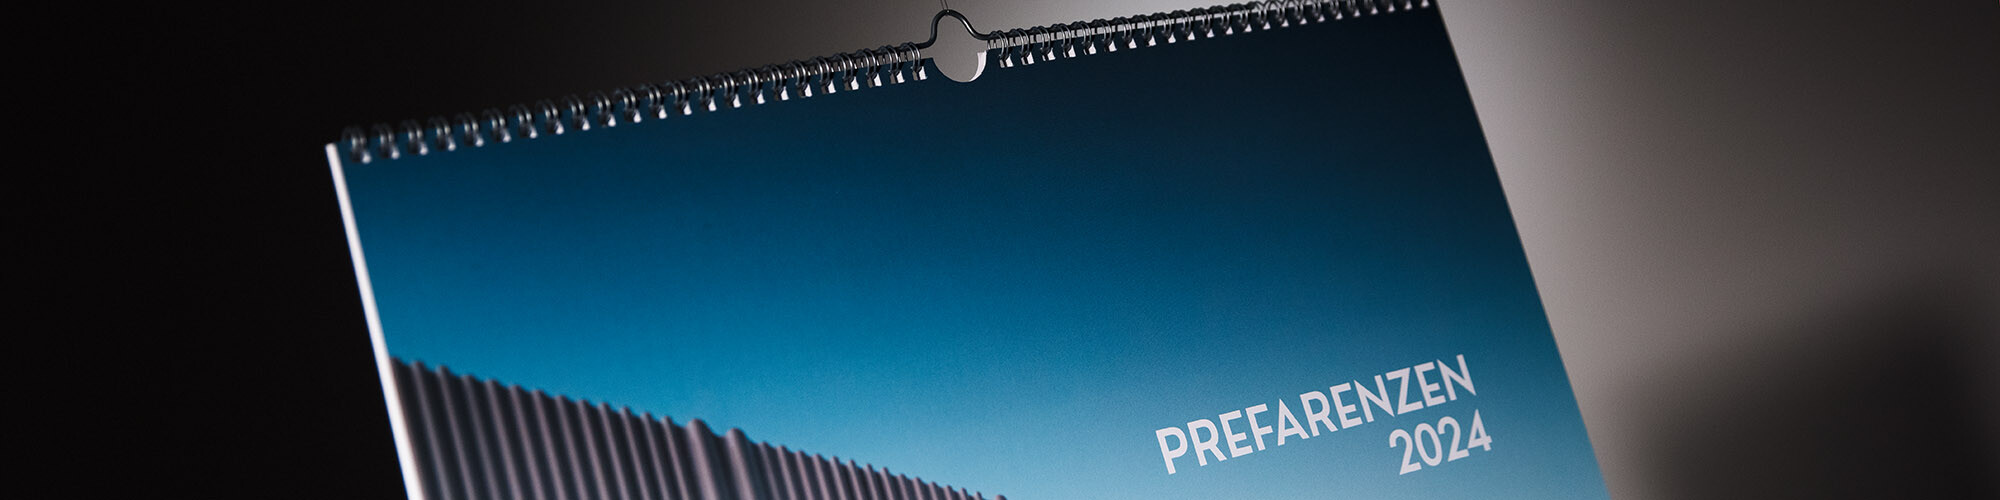 A section of the title page of the calendar up close; part of a wavy aluminium façade as well as "PREFARENZEN 2024" can be seen.